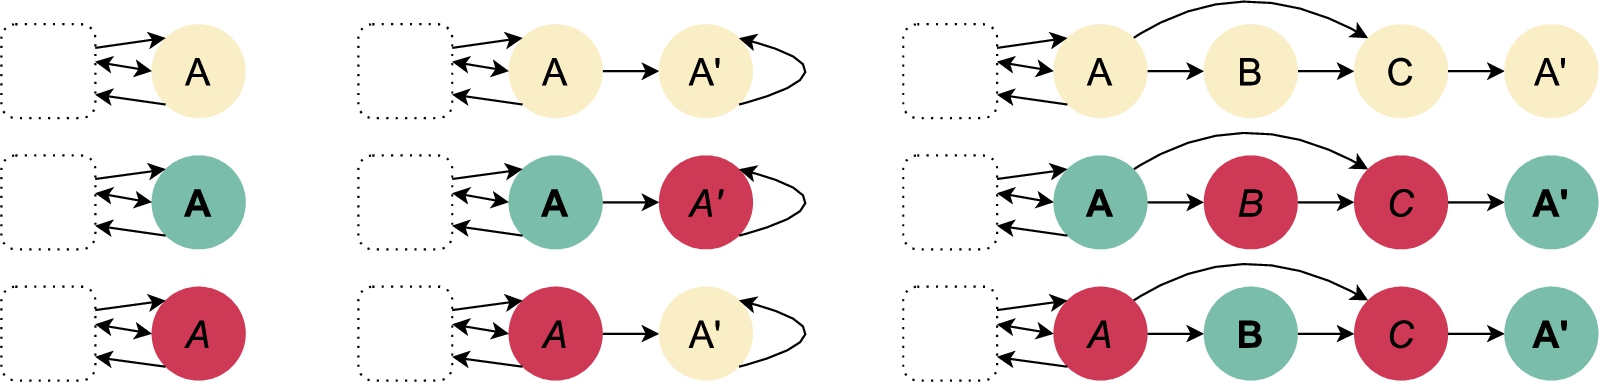 Illustration of the argumentation frameworks that are used in transformations between justification problem instances used for proving Lemma 2. The figure illustrates three argumentation frameworks: AF=⟨A,R⟩ (first column), AF′=⟨A∪{A′},R∪{(A,A′),(A′,A′)}⟩ (second column) and AF″=⟨A∪{A′,B,C},R∪{(A,B),(A,C),(B,C),(C,A′)}⟩ (third column). The dotted, rounded rectangles represent all arguments in A except A. Each of the argumentation frameworks is displayed three times, corresponding to different extensions of AF: the first row, where A is coloured yellow, represents extensions that do not contain A or any attacker of A (“A is undec”). The second row, where A is green and with boldface font, represents extensions containing A (“A is in”). Finally, the third row, where A is red and with italic font, represents extensions containing some attacker of A (“A is out”). The colours and typesetting refer to the justification statuses of arguments, where green and boldface font stands for in; yellow and regular font for undec and red and italic font for out.